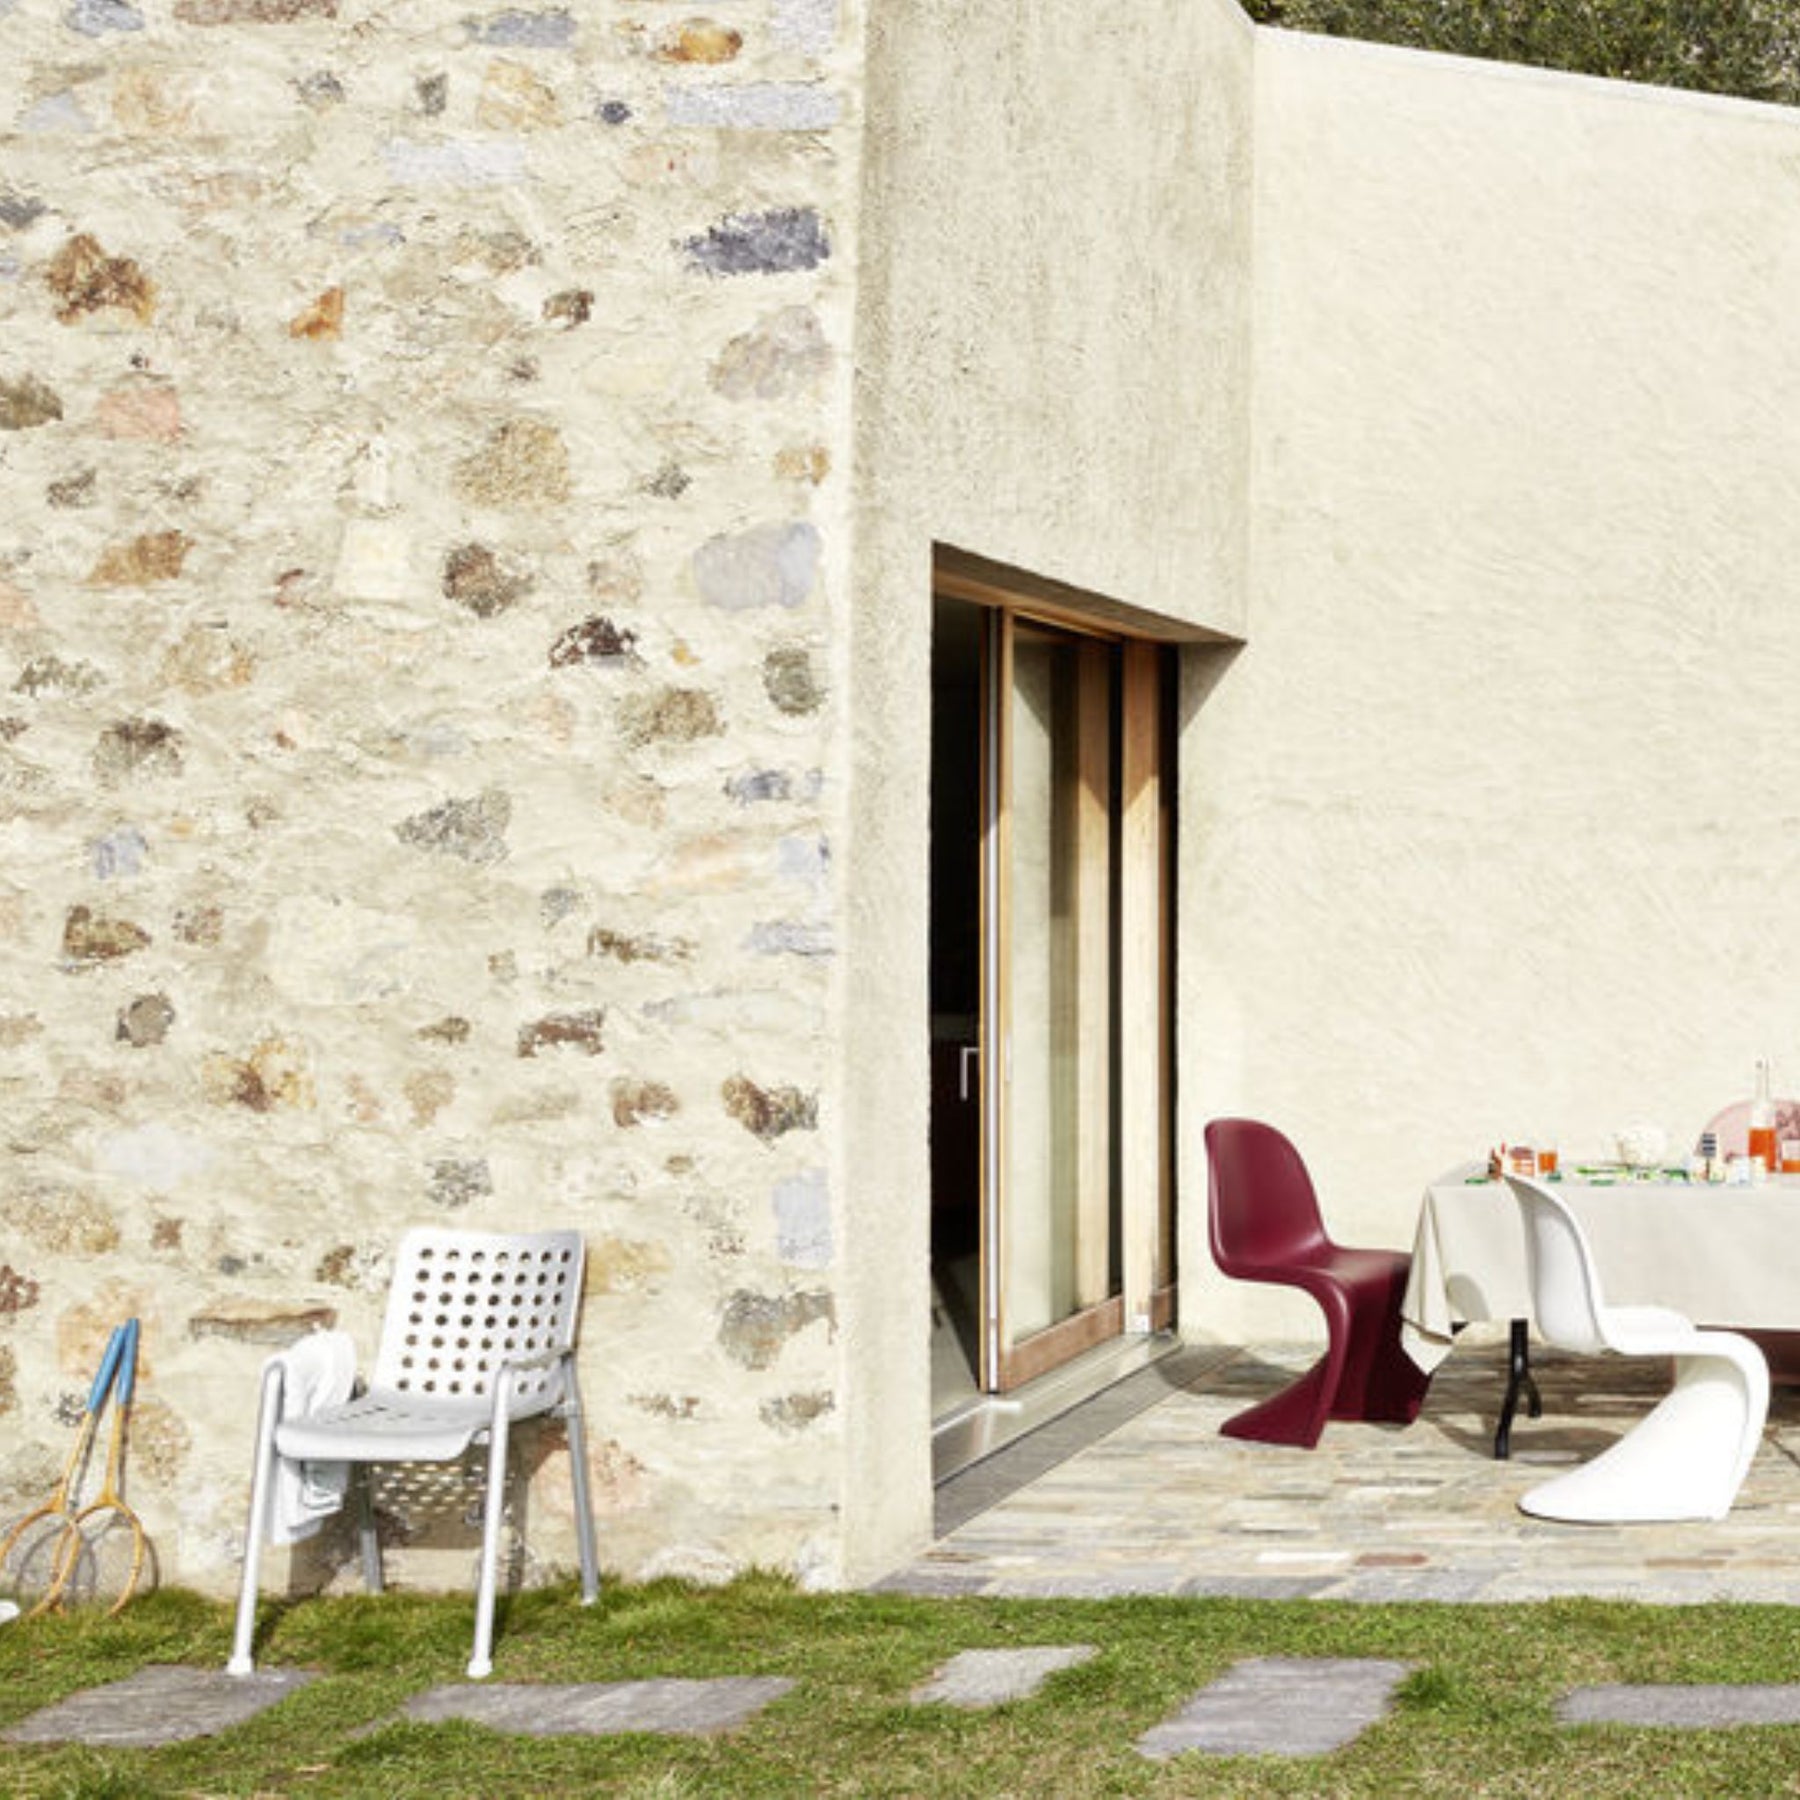 Vitra Landi Chair by Hans Coray Outdoors with Stone Wall and Panton Chairs